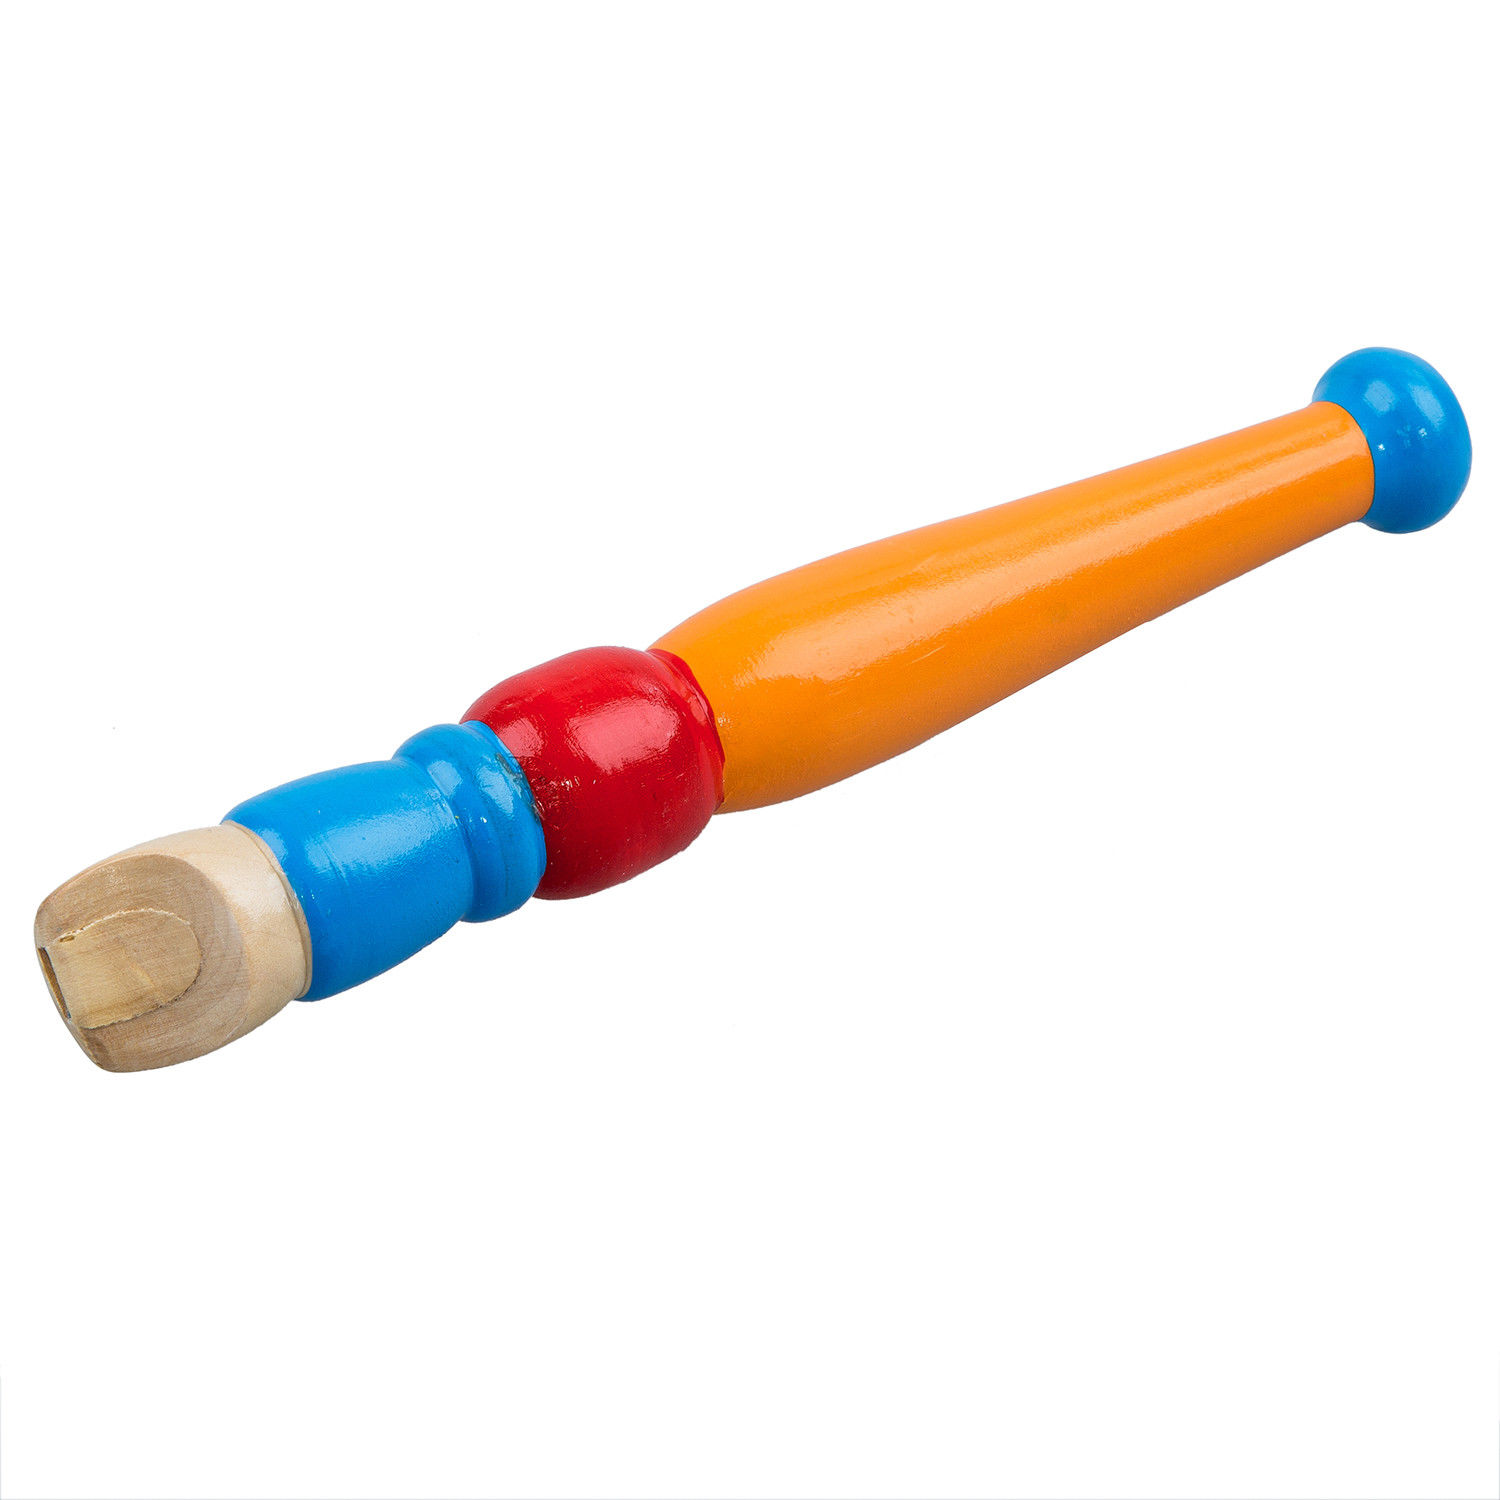 Wooden toy flute photo